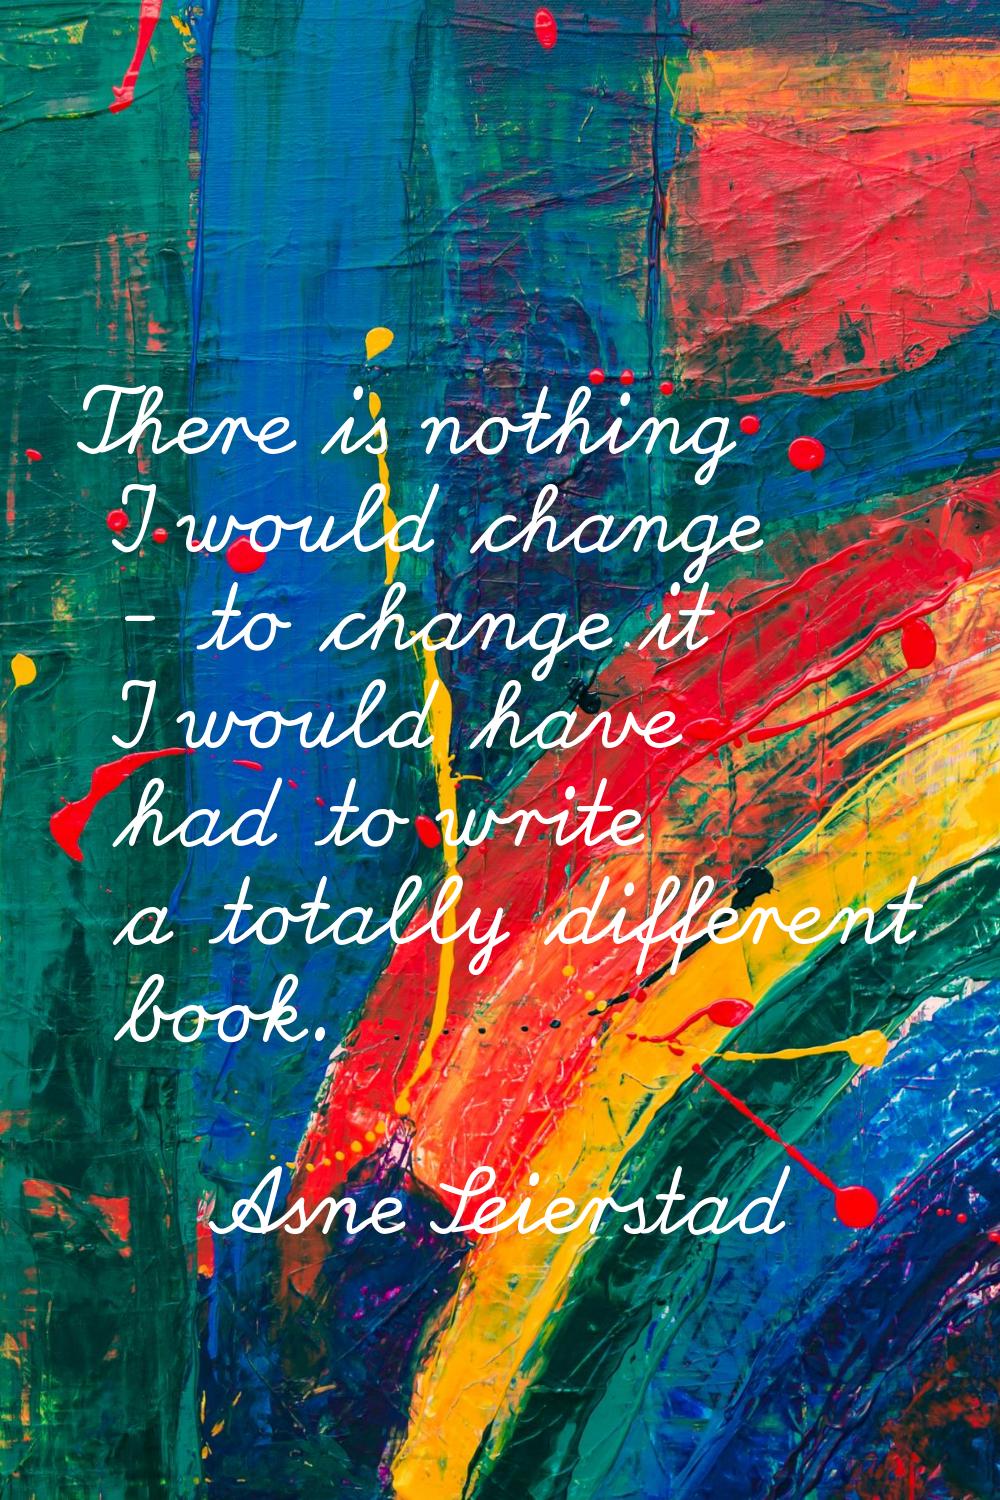 There is nothing I would change - to change it I would have had to write a totally different book.